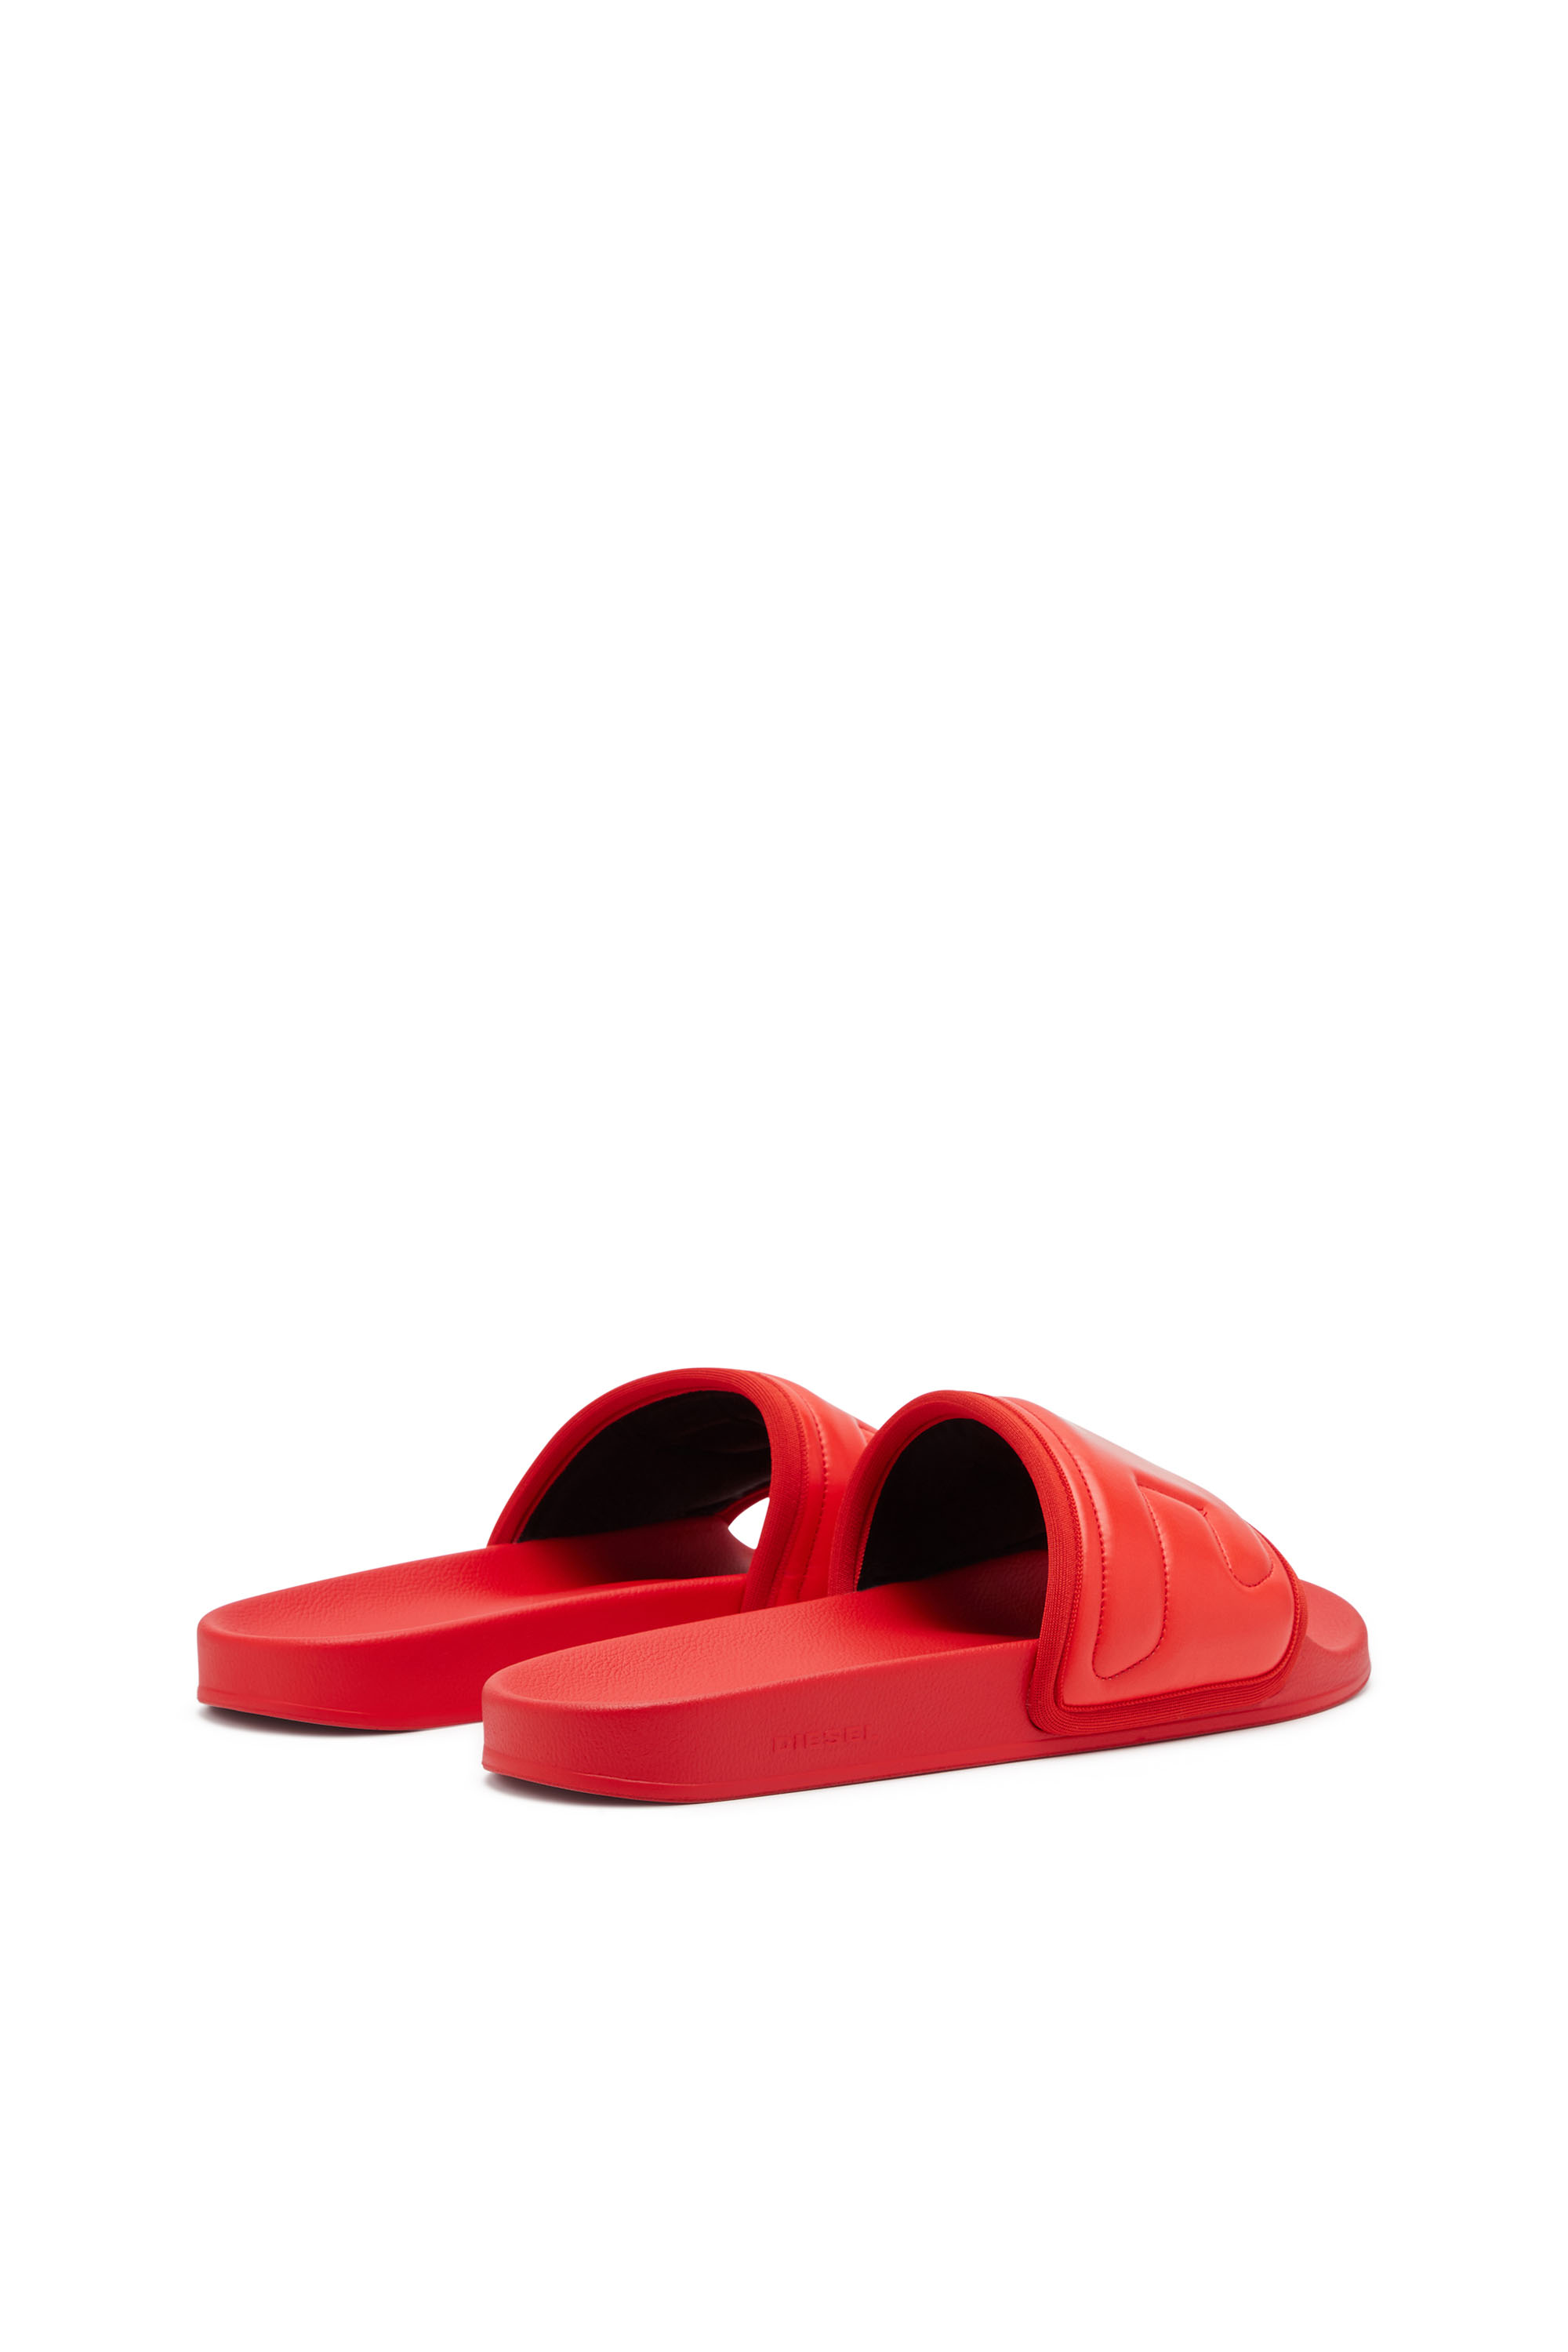 Diesel - SA-MAYEMI PUF X, Unisex Sa-Mayemi Puf X - Pool slides with puffy D logo in Red - Image 3